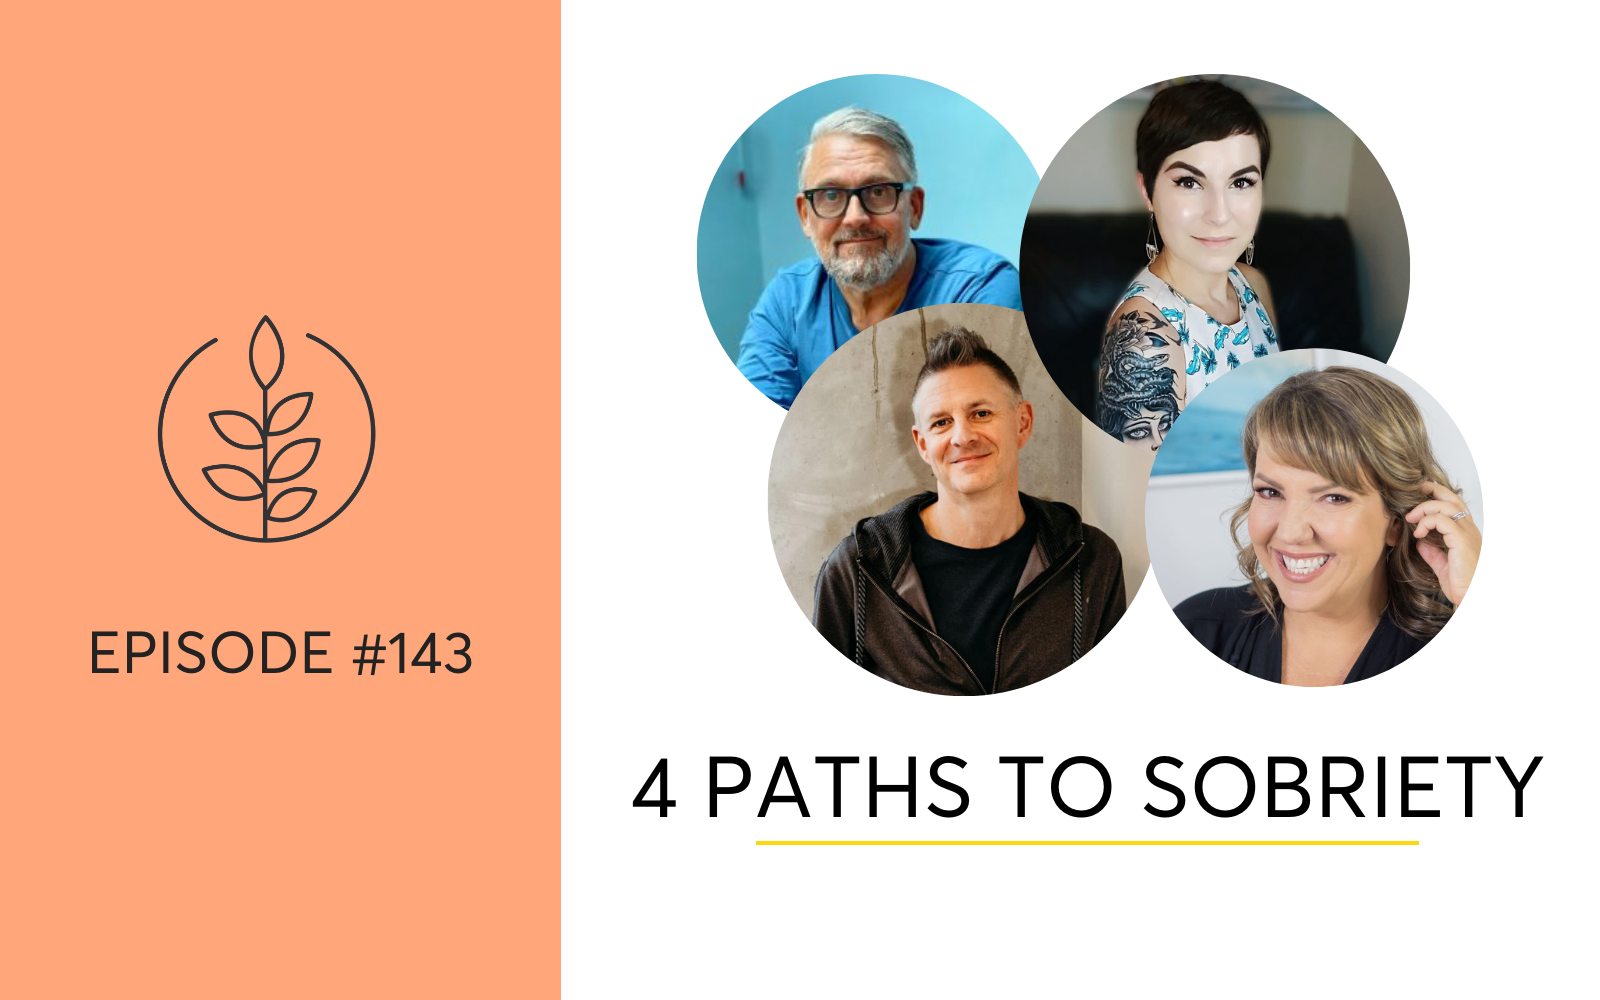 Choose The Best Path To Sobriety For You